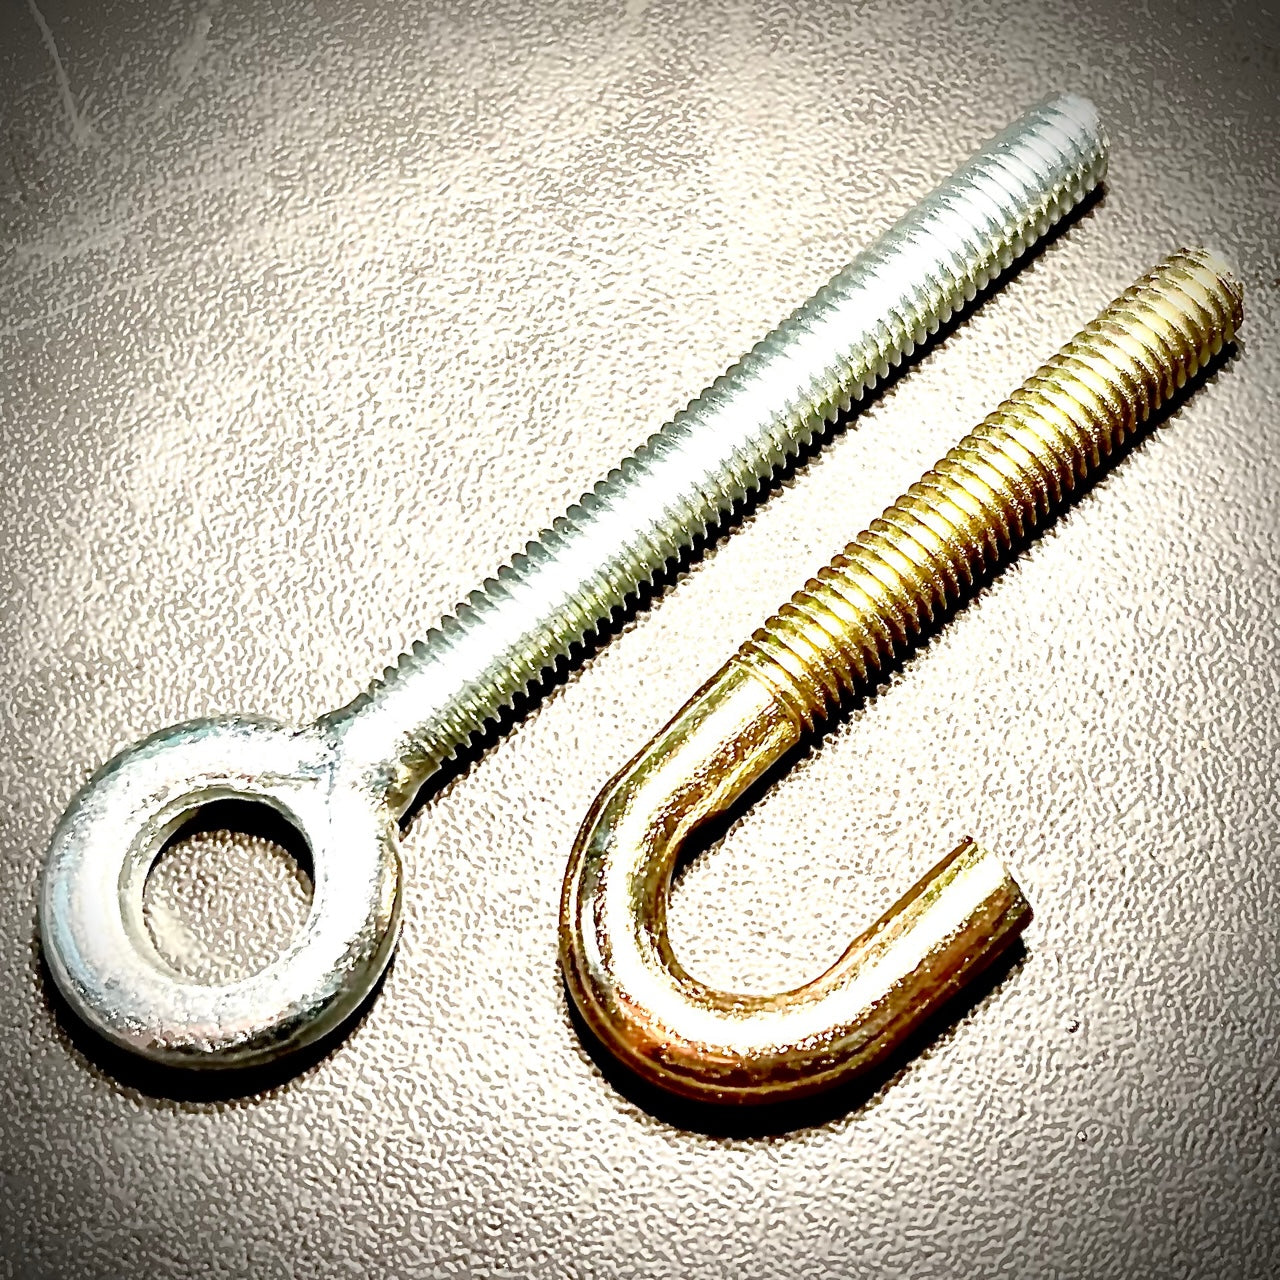 Wire, Cable, Rope Fixing Eyebolts and Hookbolts, Grade 4.8, Zinc Wire, Cable, Rope Fixing Wire, Cable, Rope Fixing Eyebolts and Hookbolts, Grade 4.8, Zinc Eyebolt/ Hookbolt